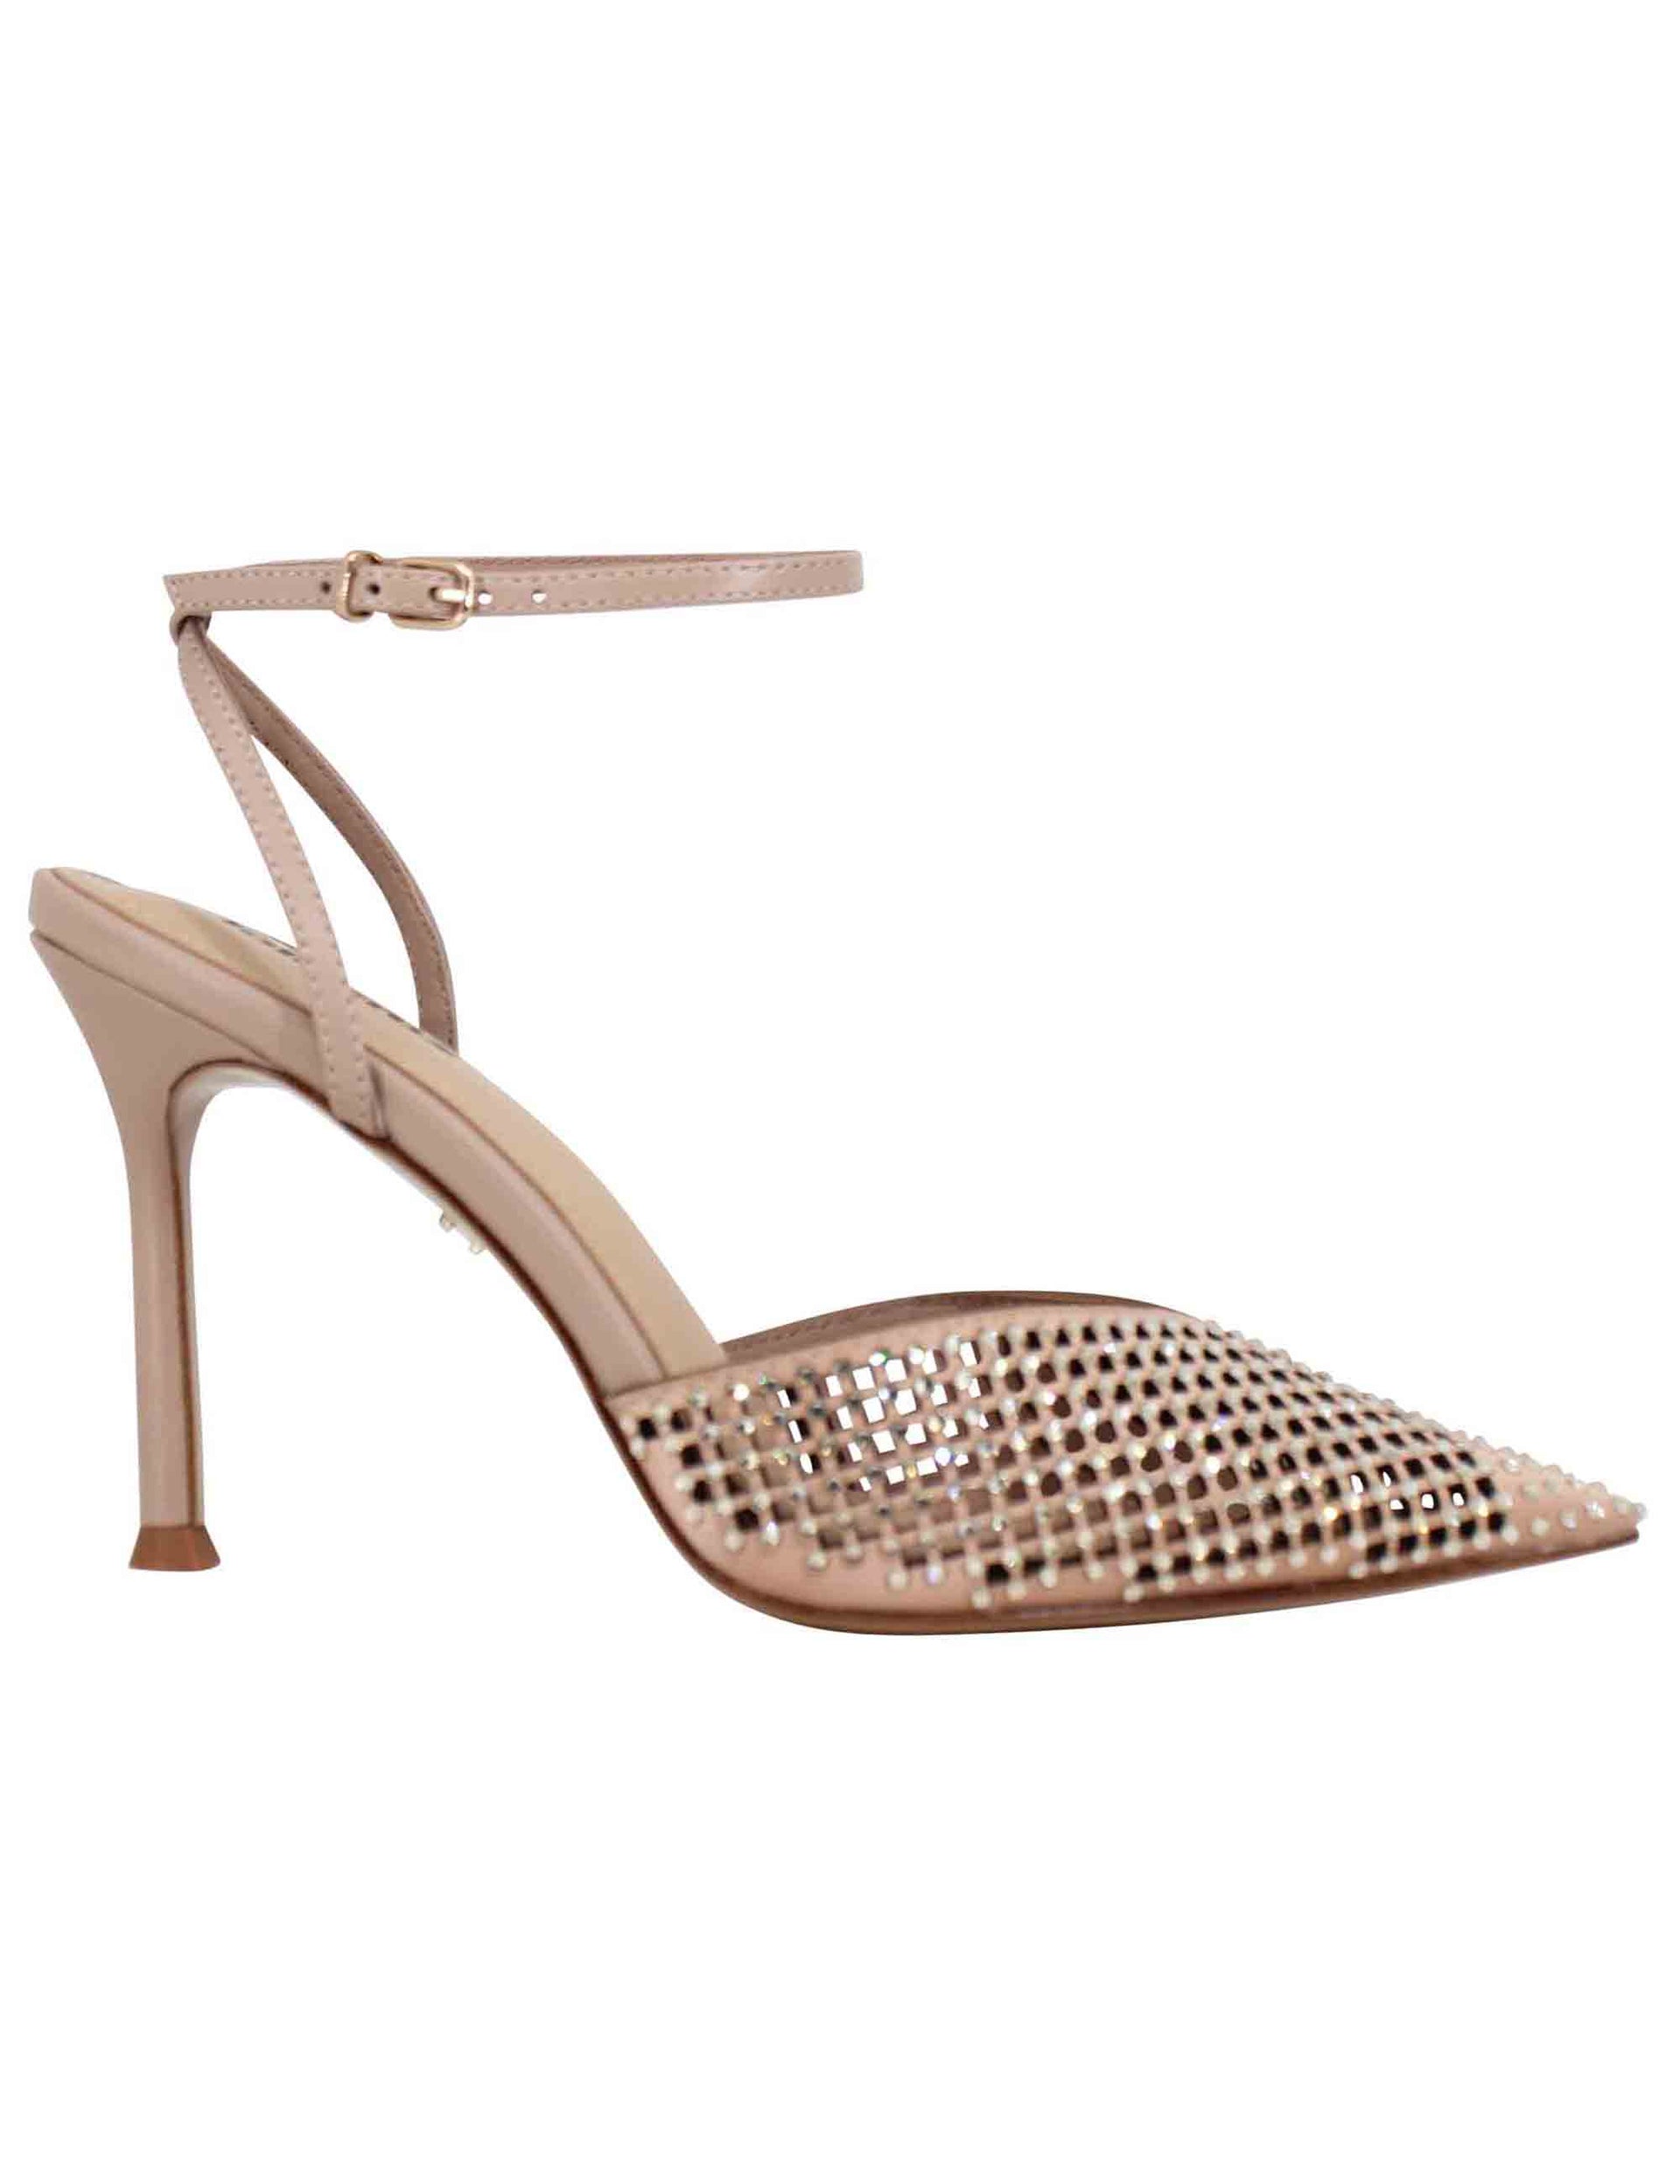 Women's slingback sandals in nude leather with rhinestones and high stiletto heels Naomi